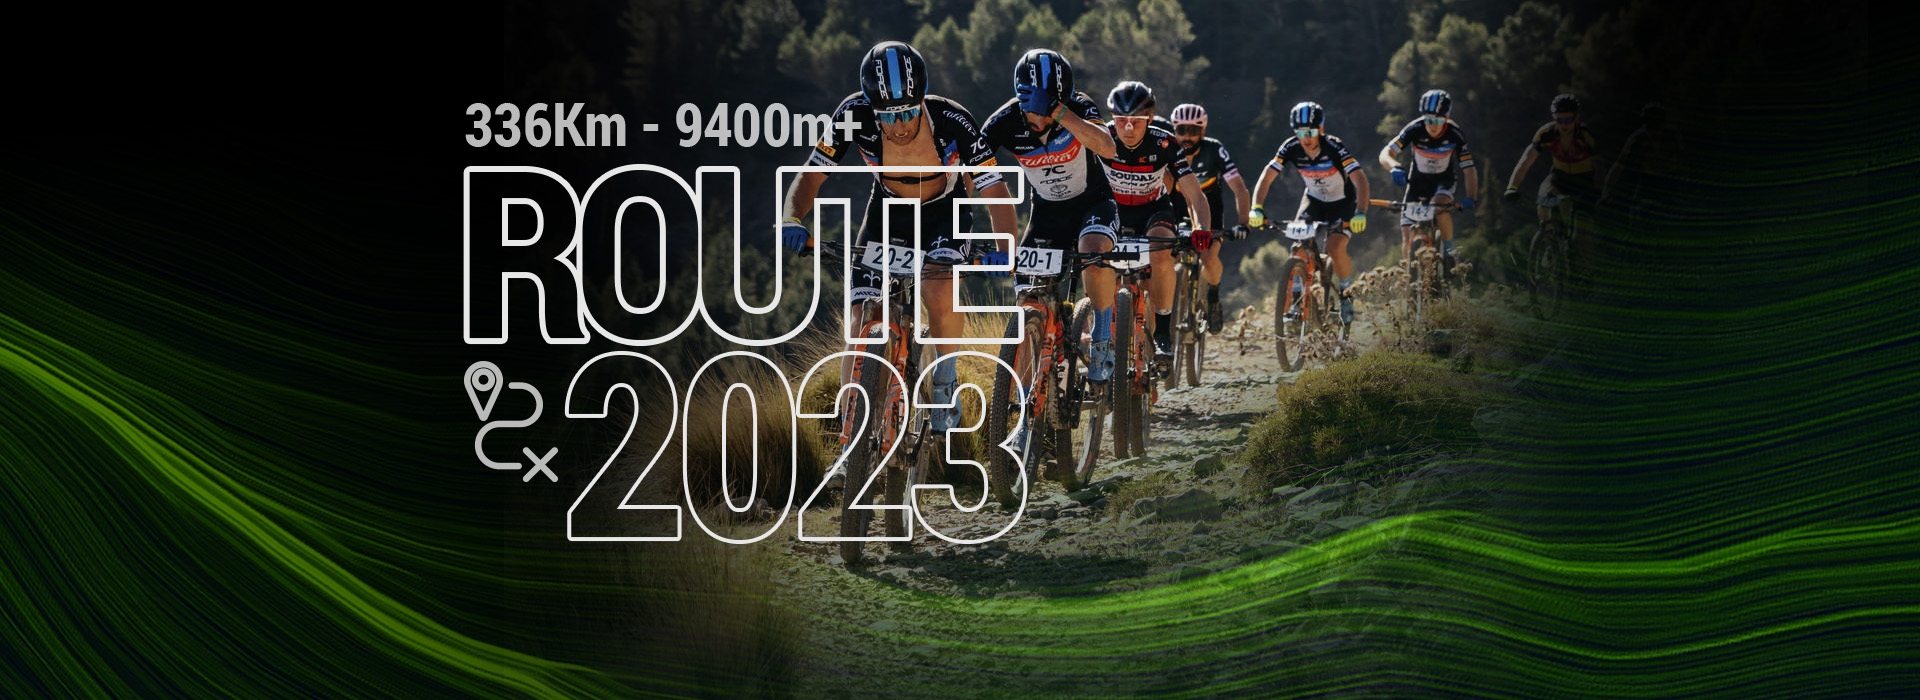 The route of the Andalucía Bike Race by GARMIN 2023 is already defined